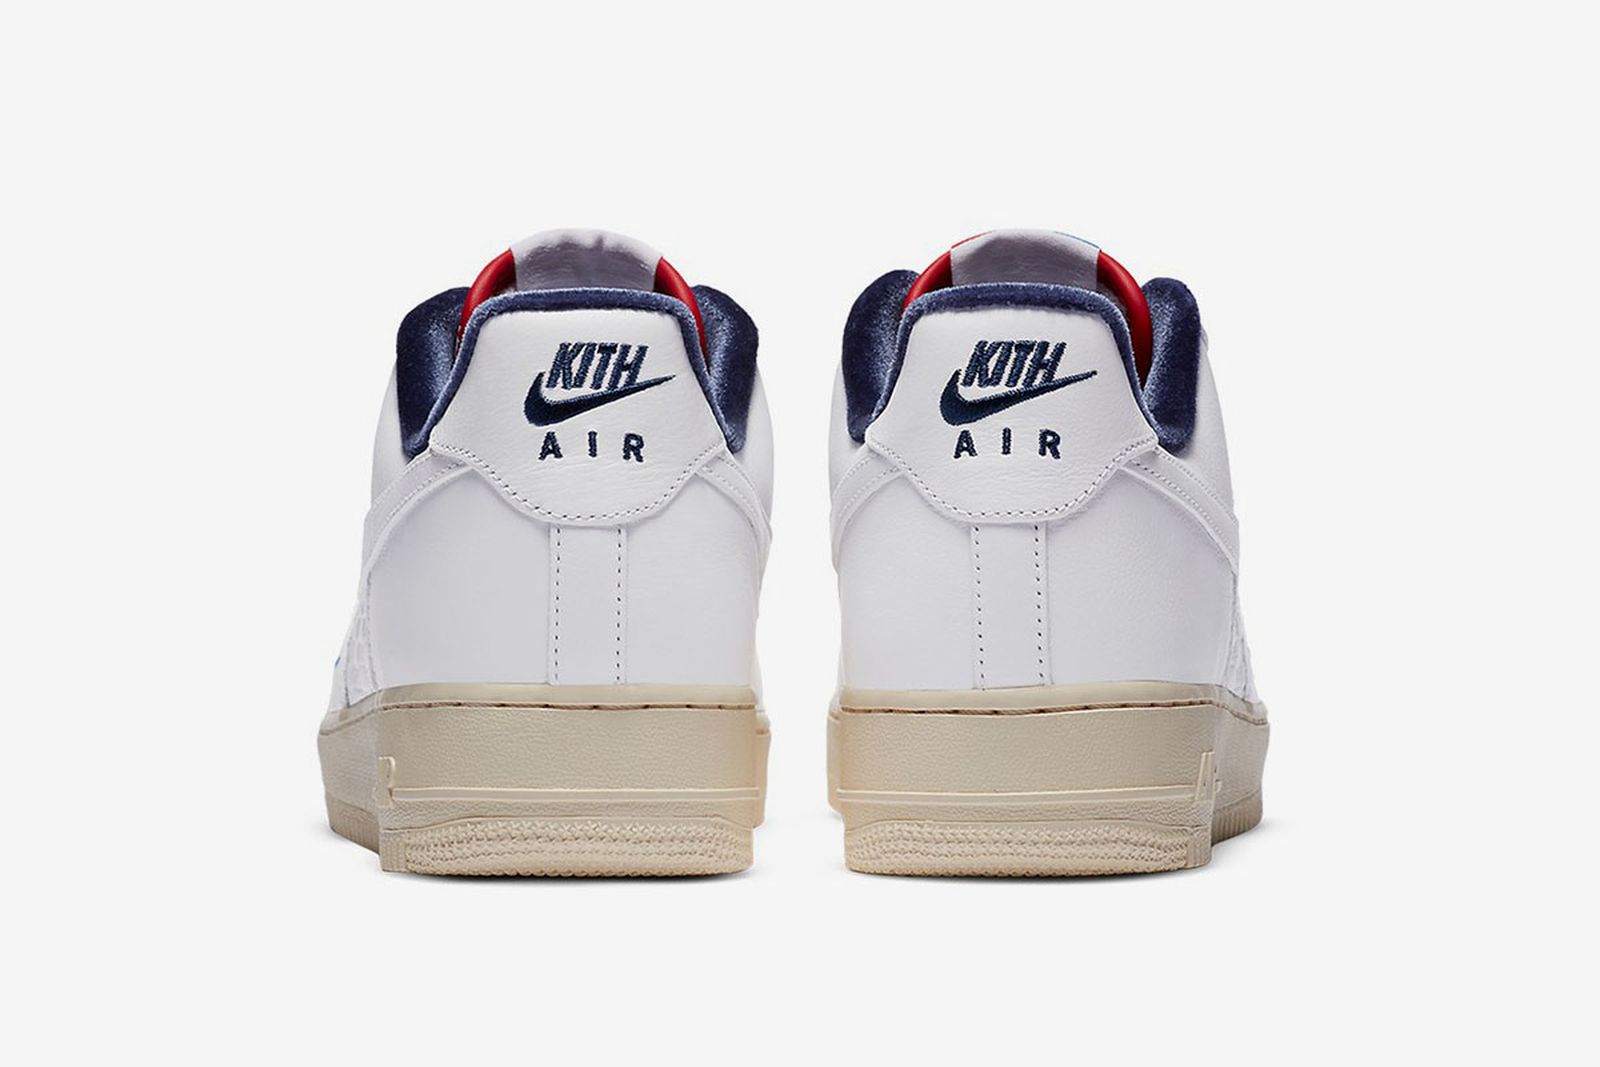 Kith x Nike Air Force 1 “Paris”: Official Release Information